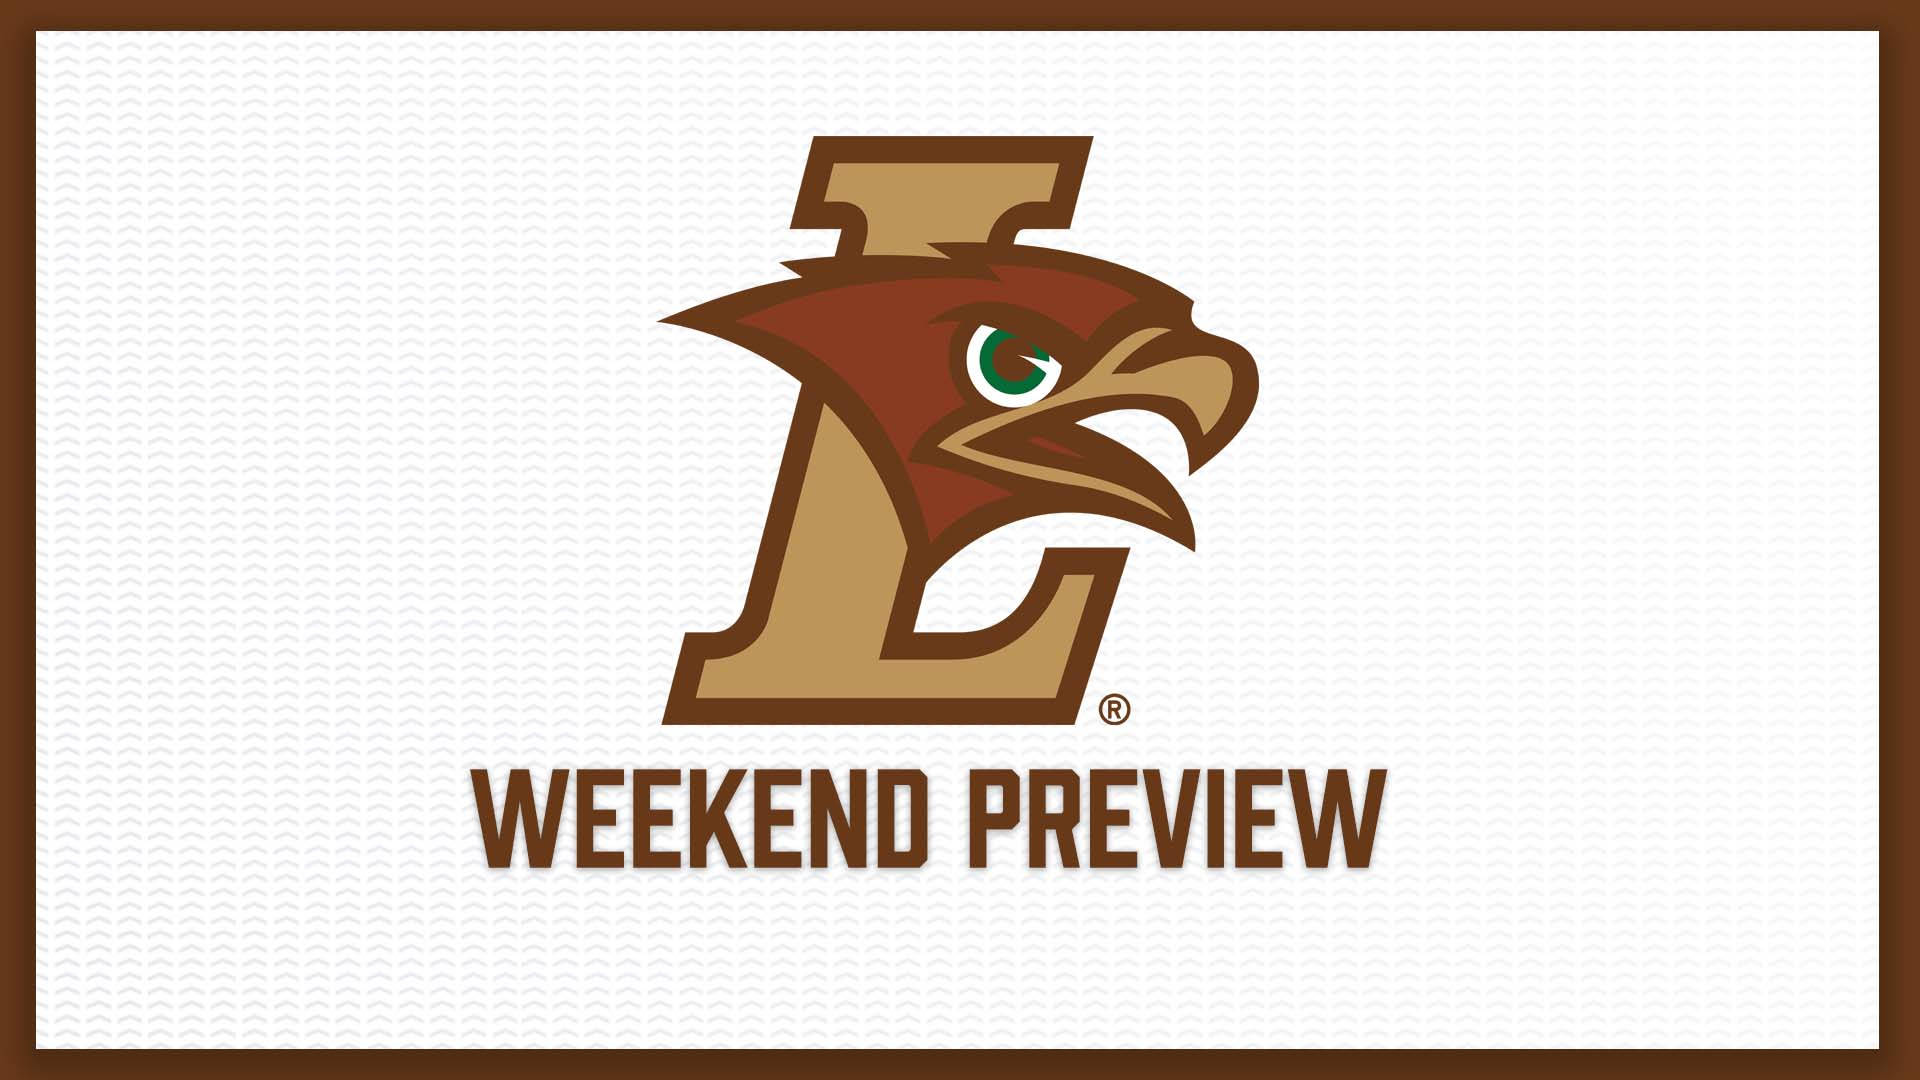 Lehigh University's official logo with brown borders Wallpaper